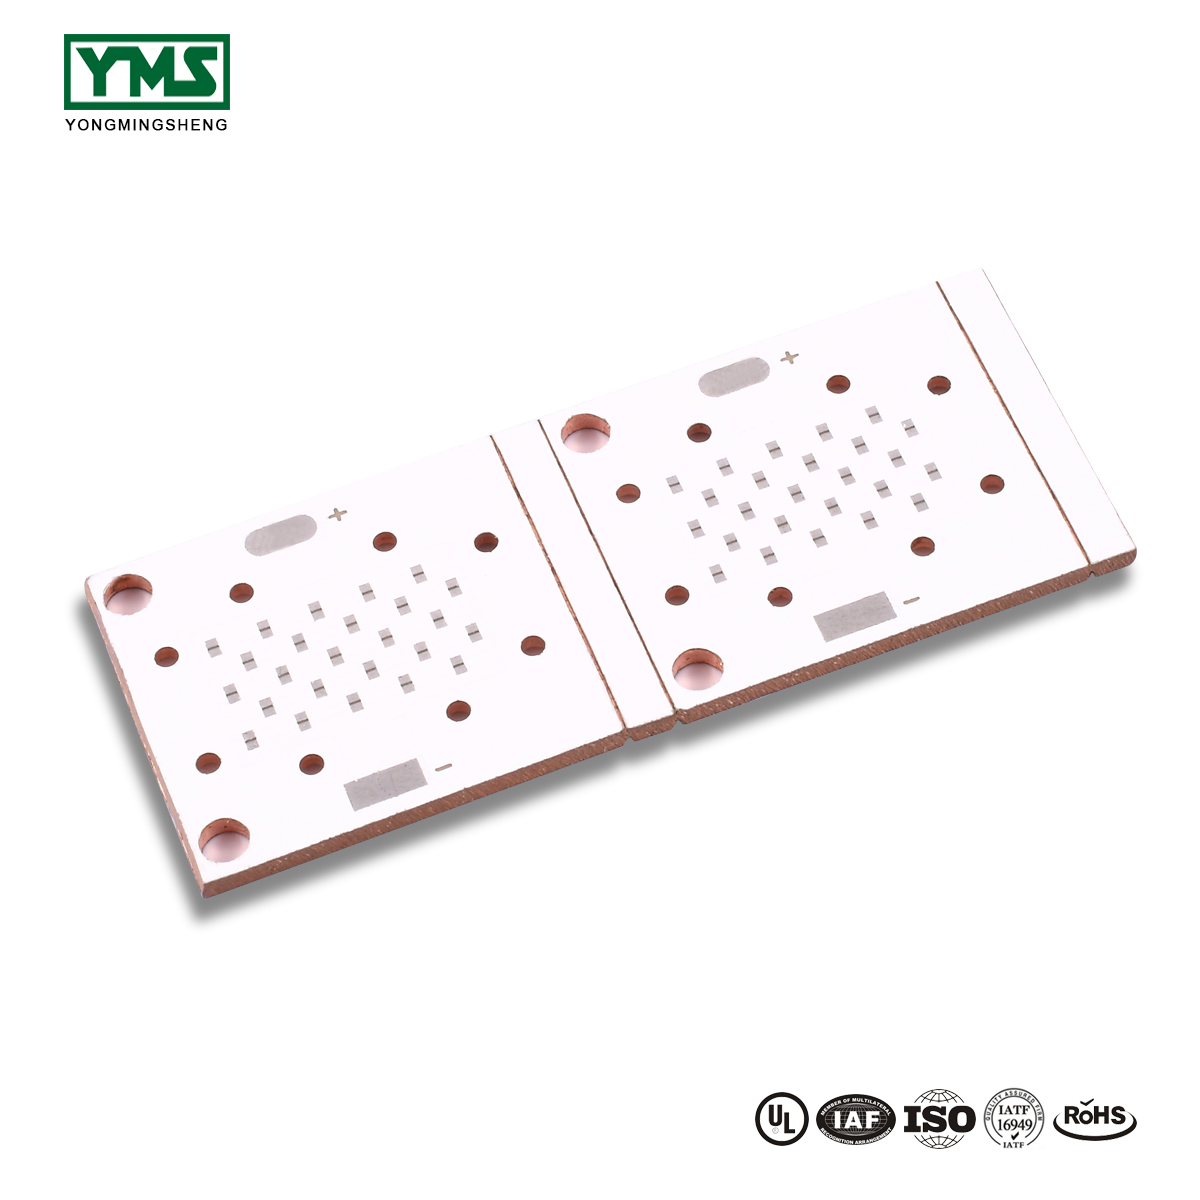 Best Price onImmersion Silver Flex-Rigid Pcb - 1 Layer Thermoelectric Copper base Board | YMSPCB – Yongmingsheng